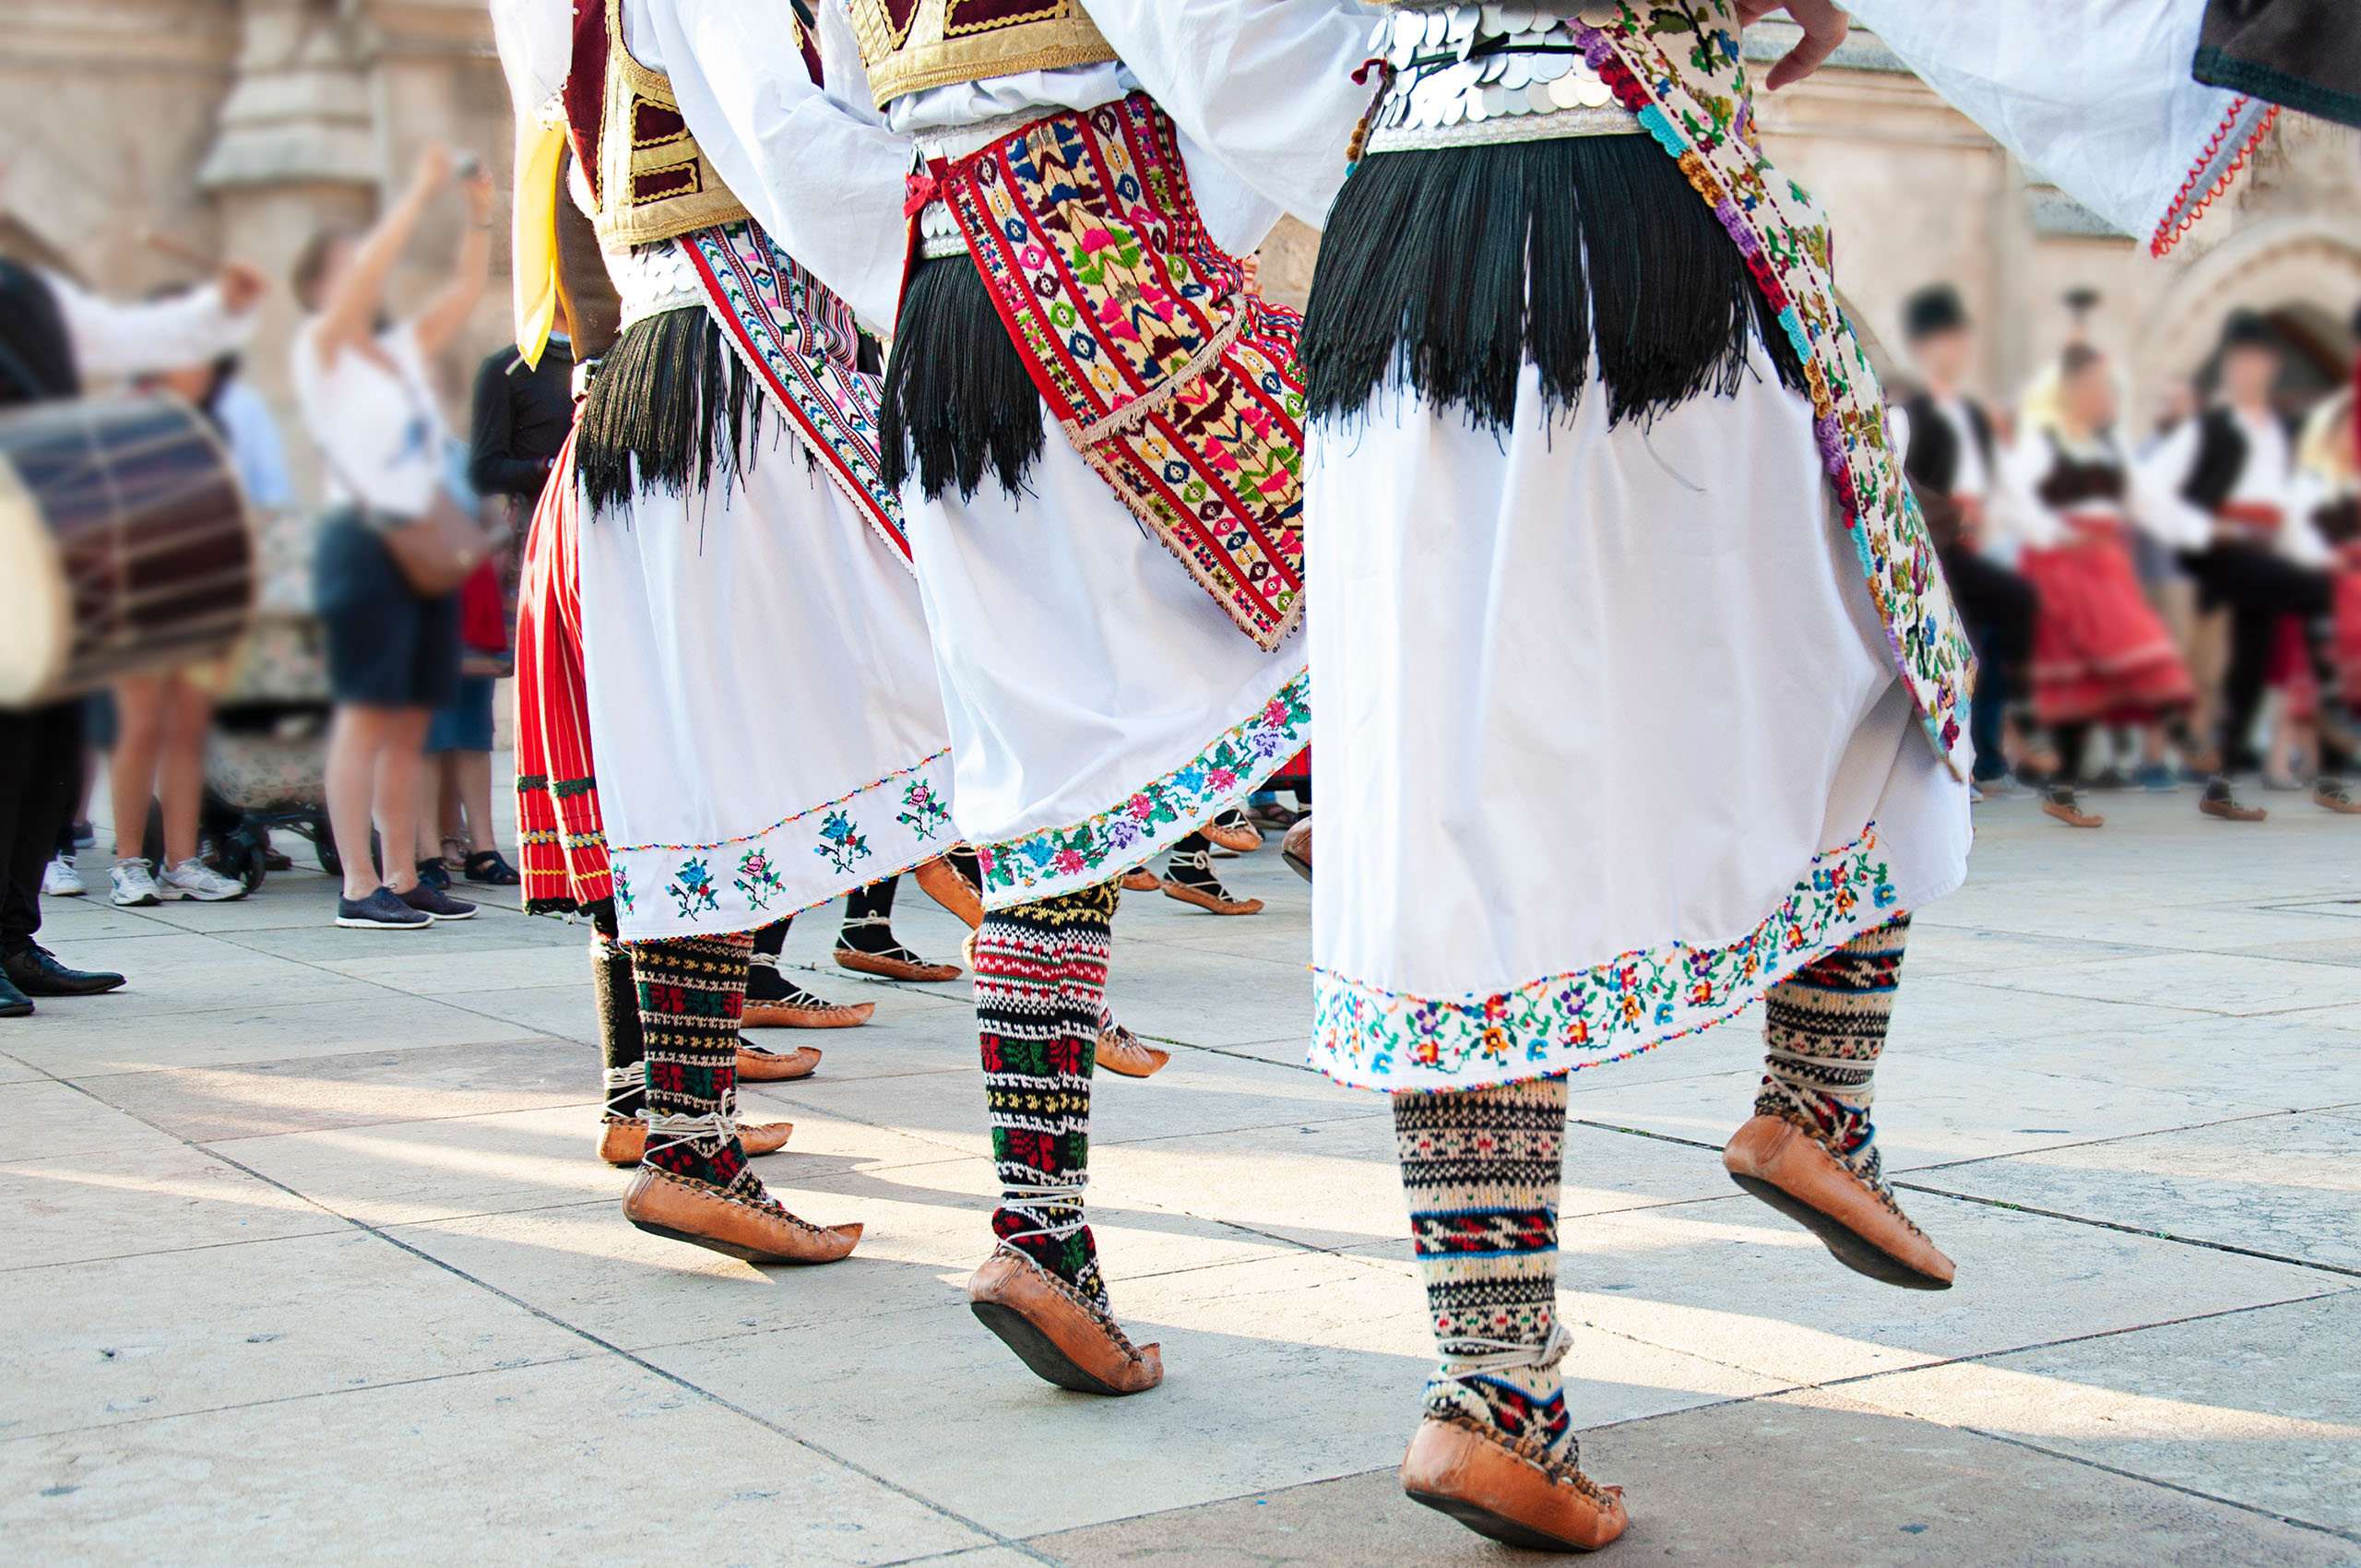 Women wearing one of the traditional folk costume from the Republic of Serbia dancing